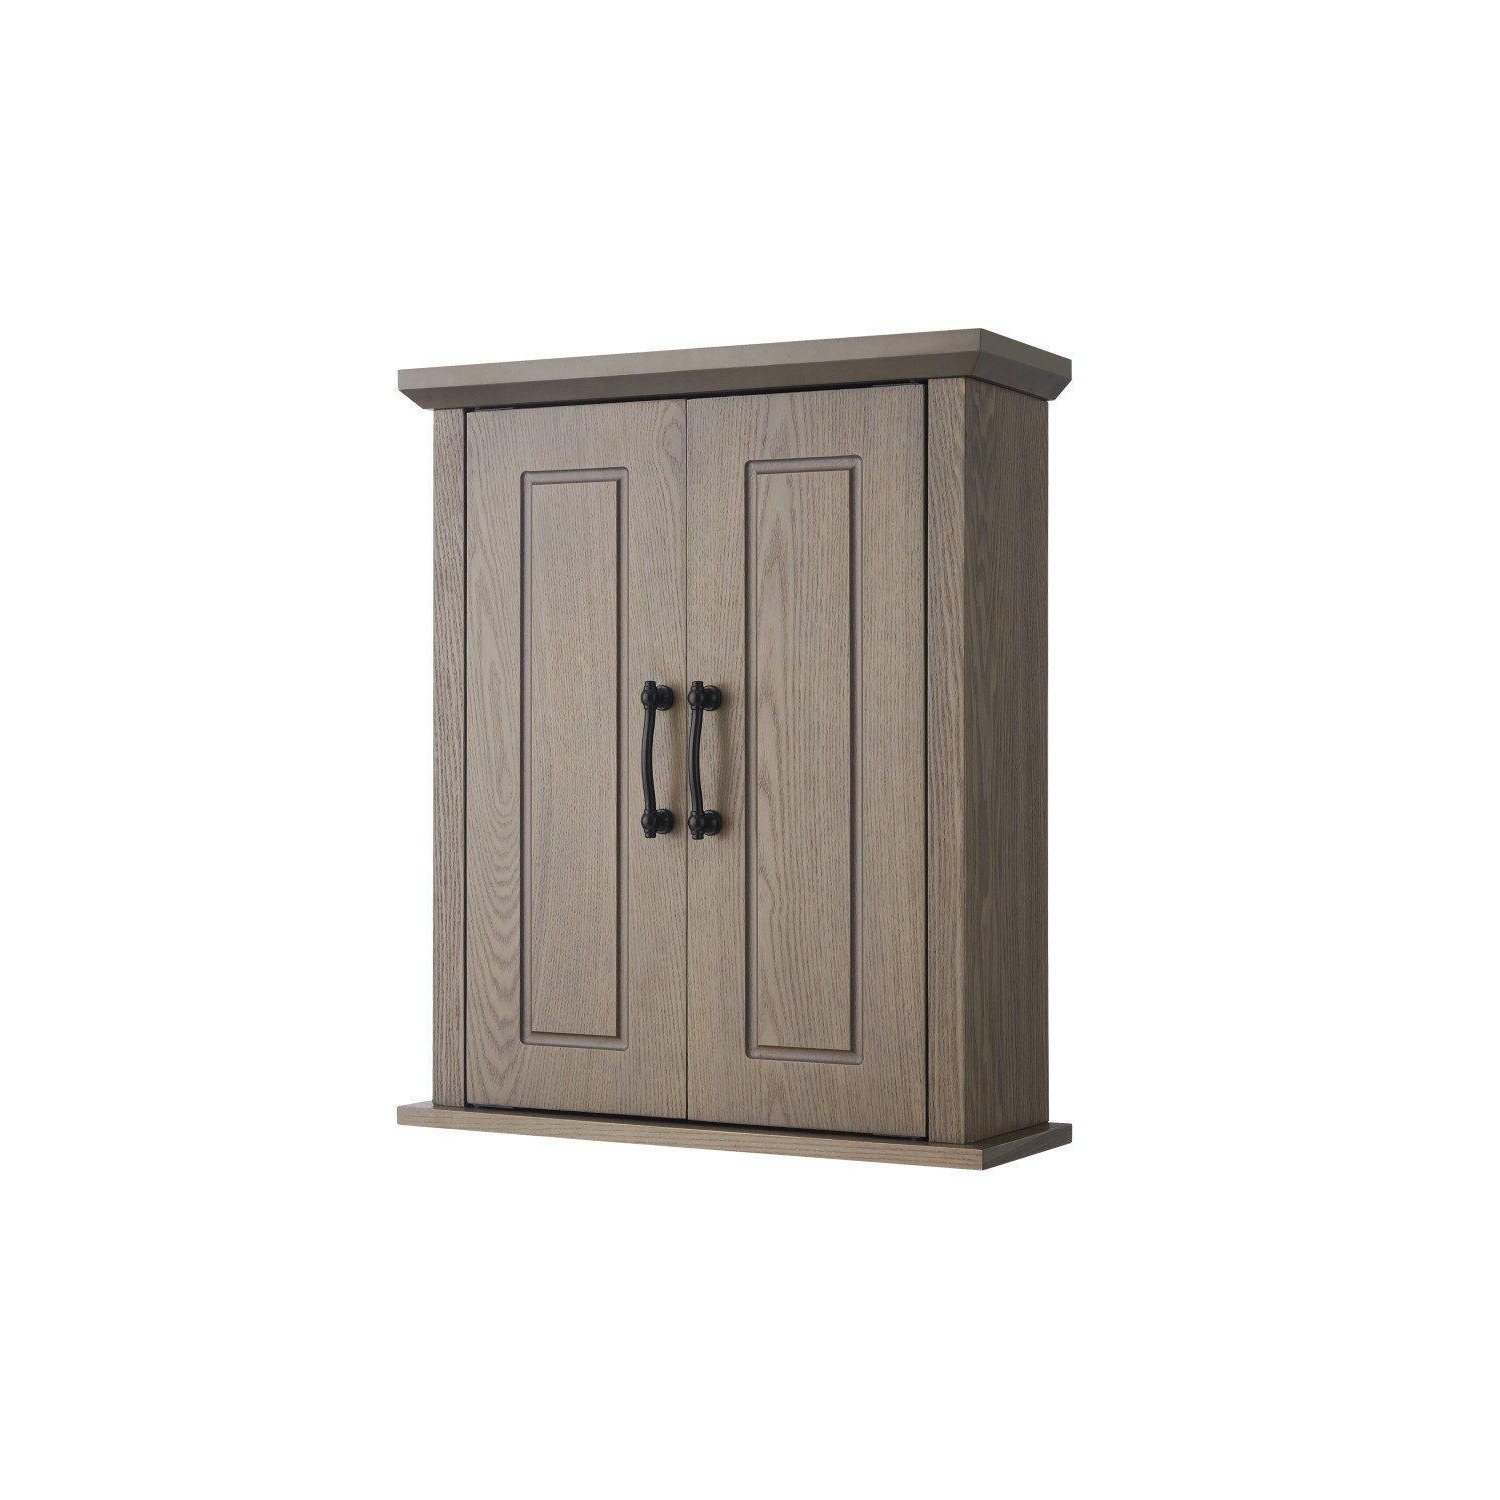 Russell Wooden Bathroom Wall Medicine Cabinet - image 1